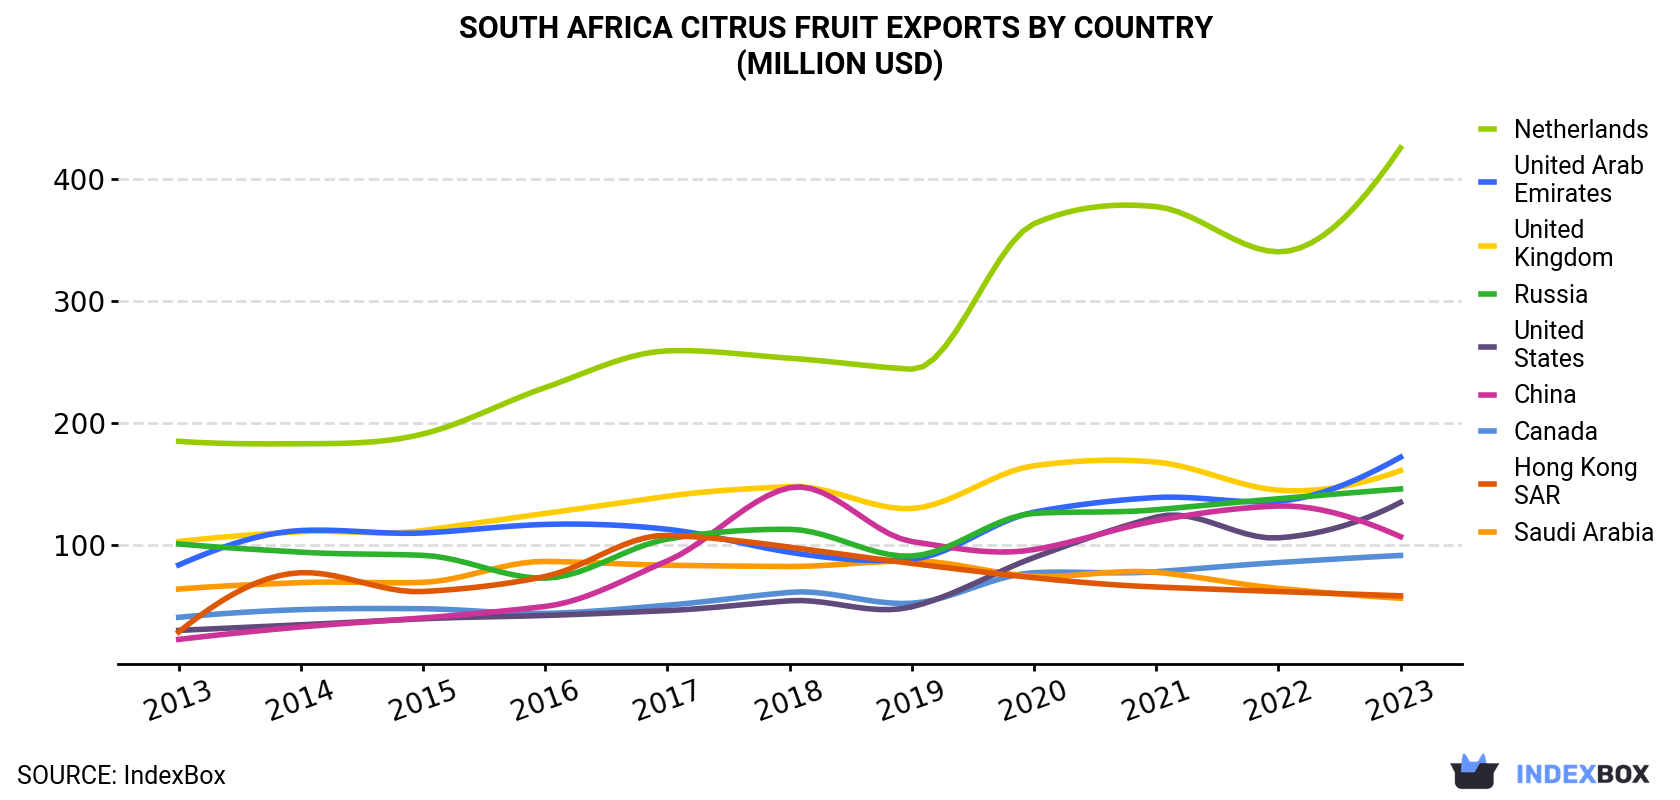 South Africa Citrus Fruit Exports By Country (Million USD)